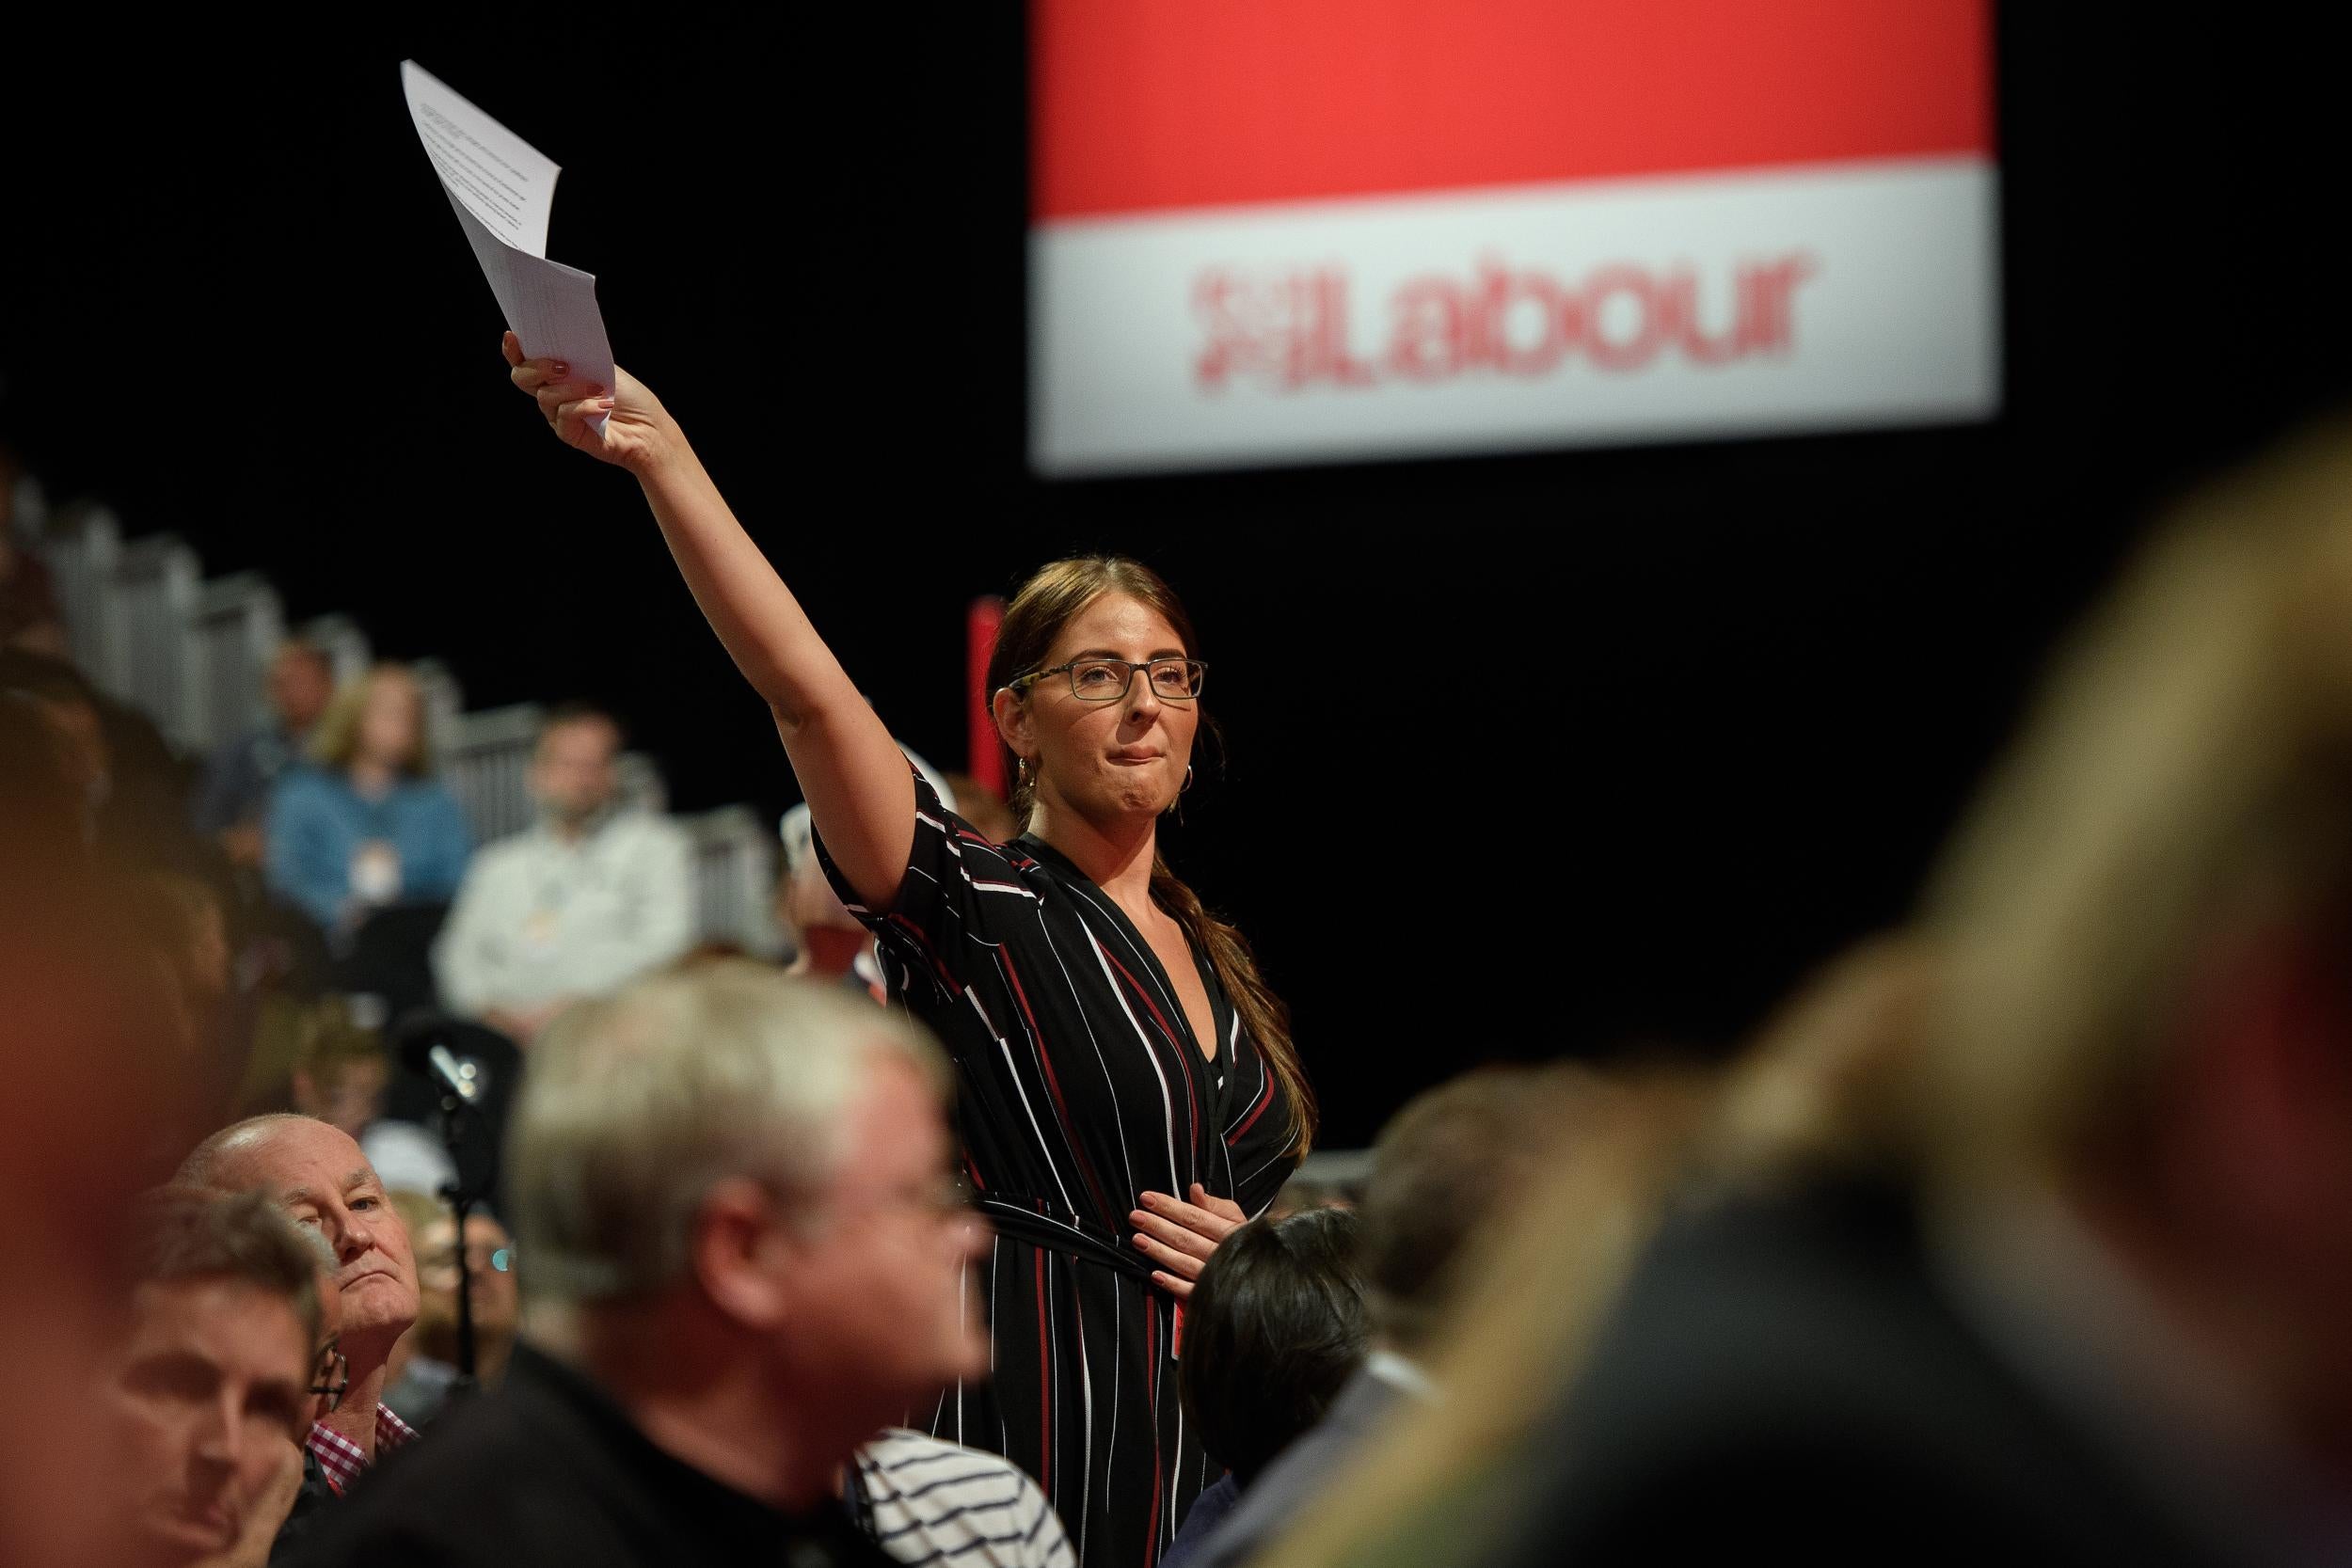 Laura Pidcock, out of parliament but back as a member of Labour’s NEC